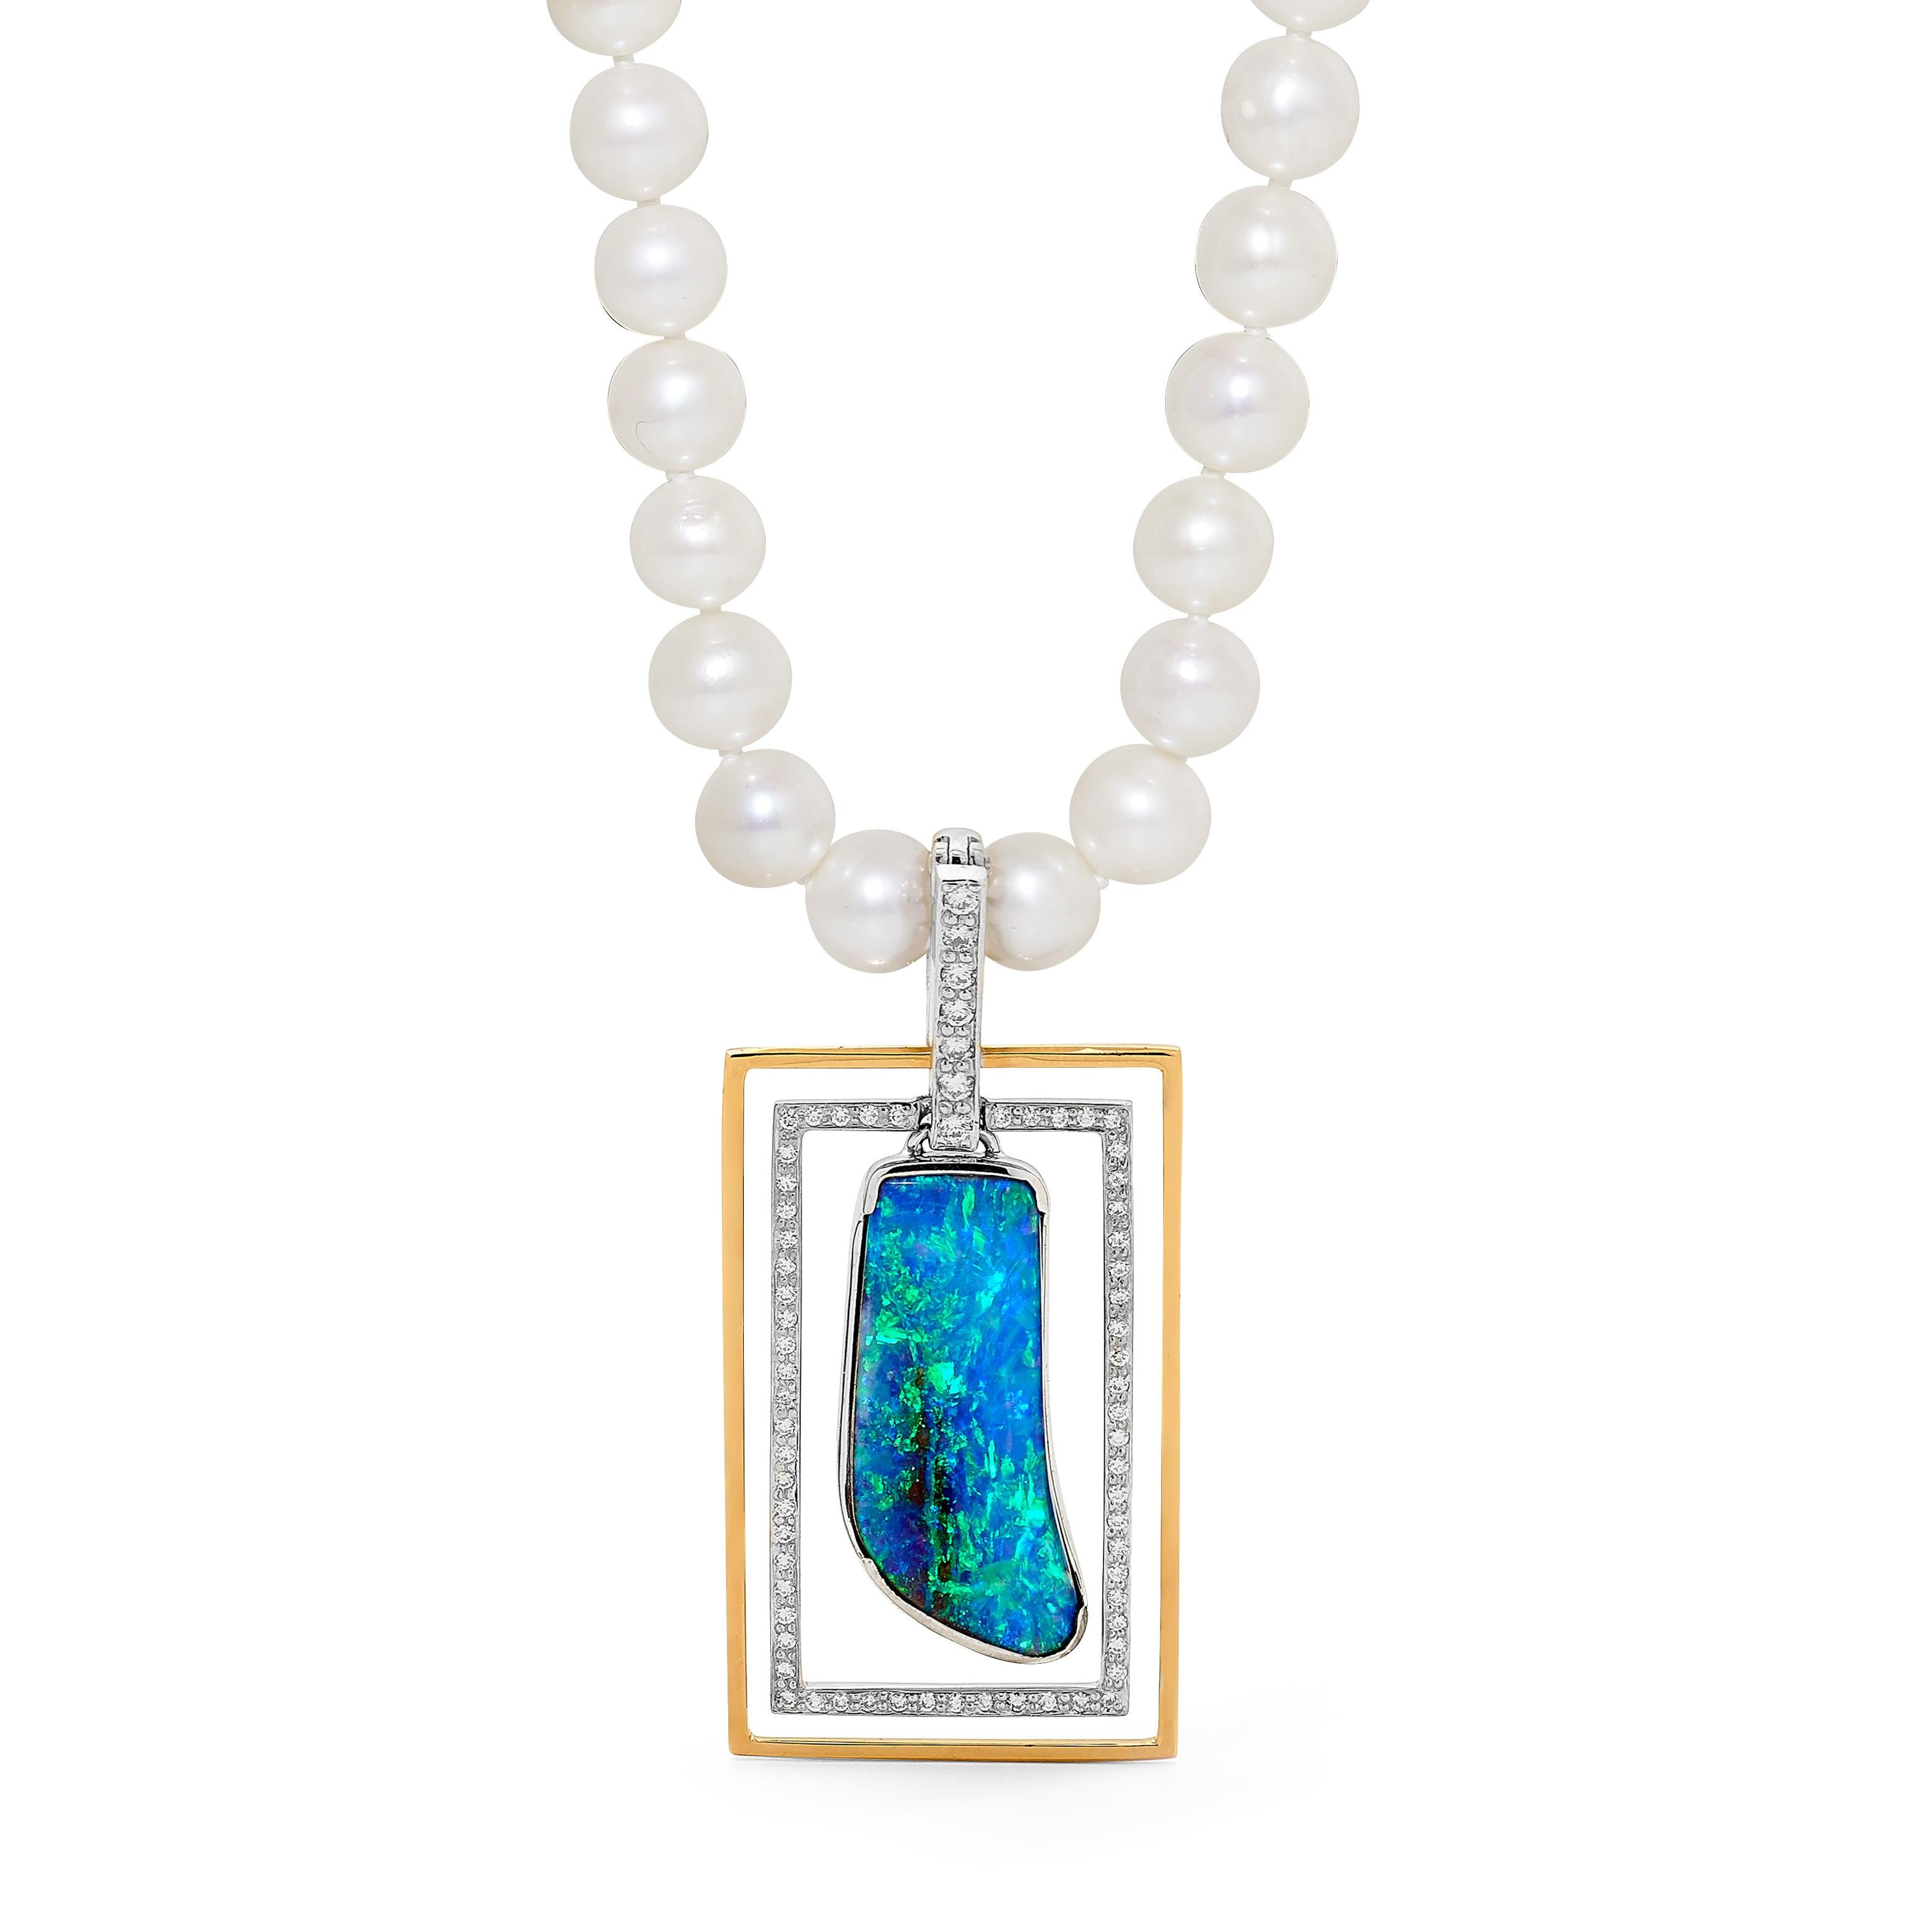 “E=mc2” opal pendant was inspired by the shifting paradigms of modern physics. The beauty of this exquisite freeform Winton boulder opal (14.97ct) is heightened by icy diamonds and its geometric 18K white and rose gold setting. The frames separate